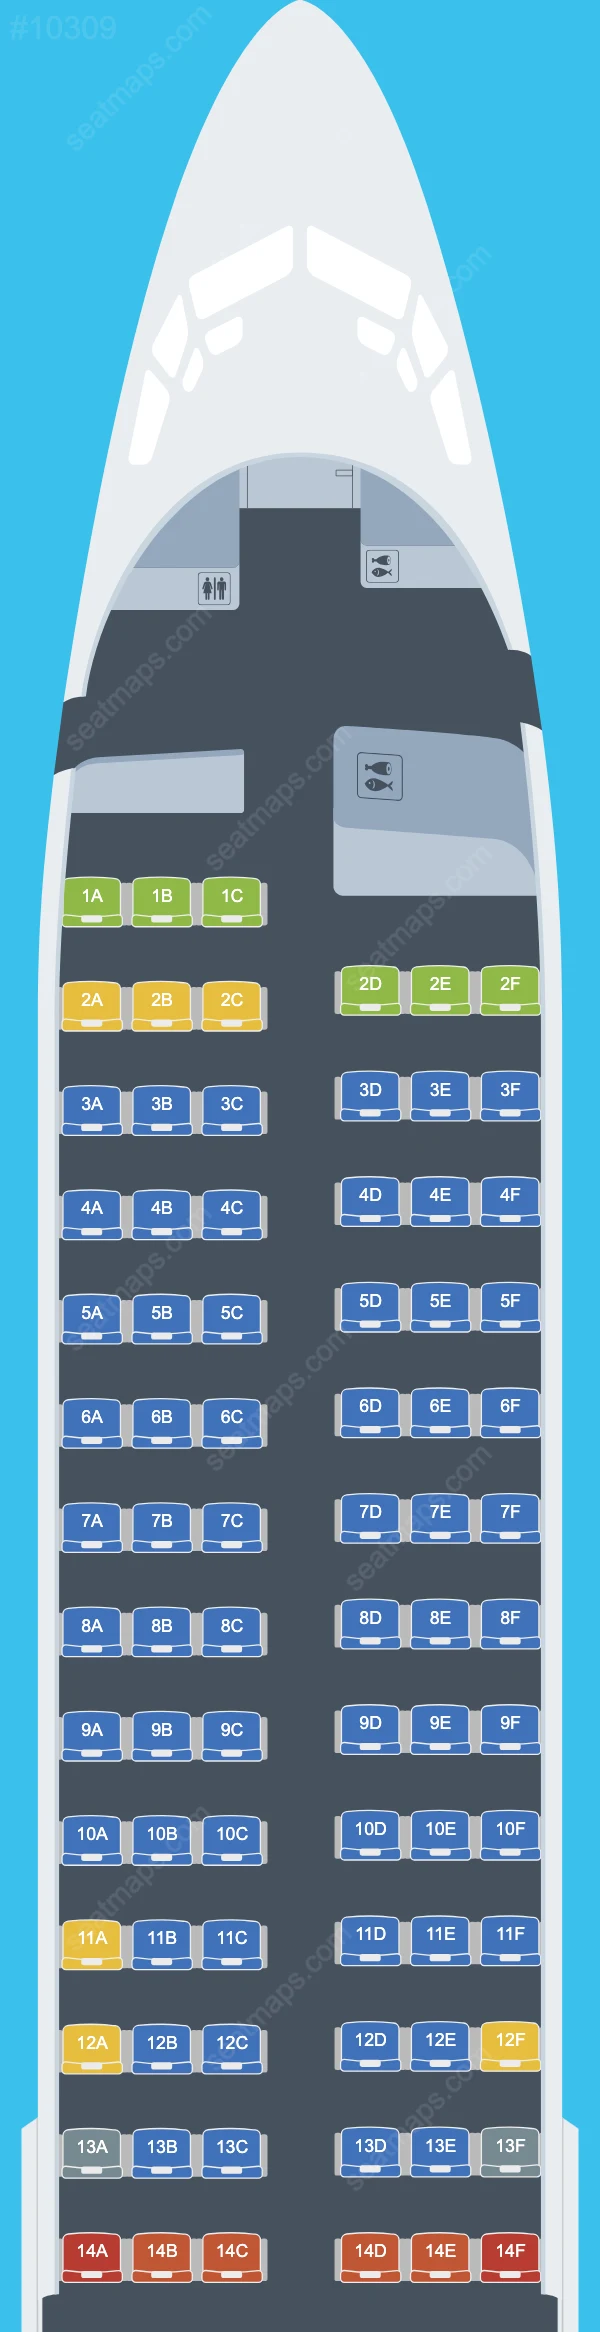 AJet Boeing 737-800 aircraft seat map  737-800 V.1